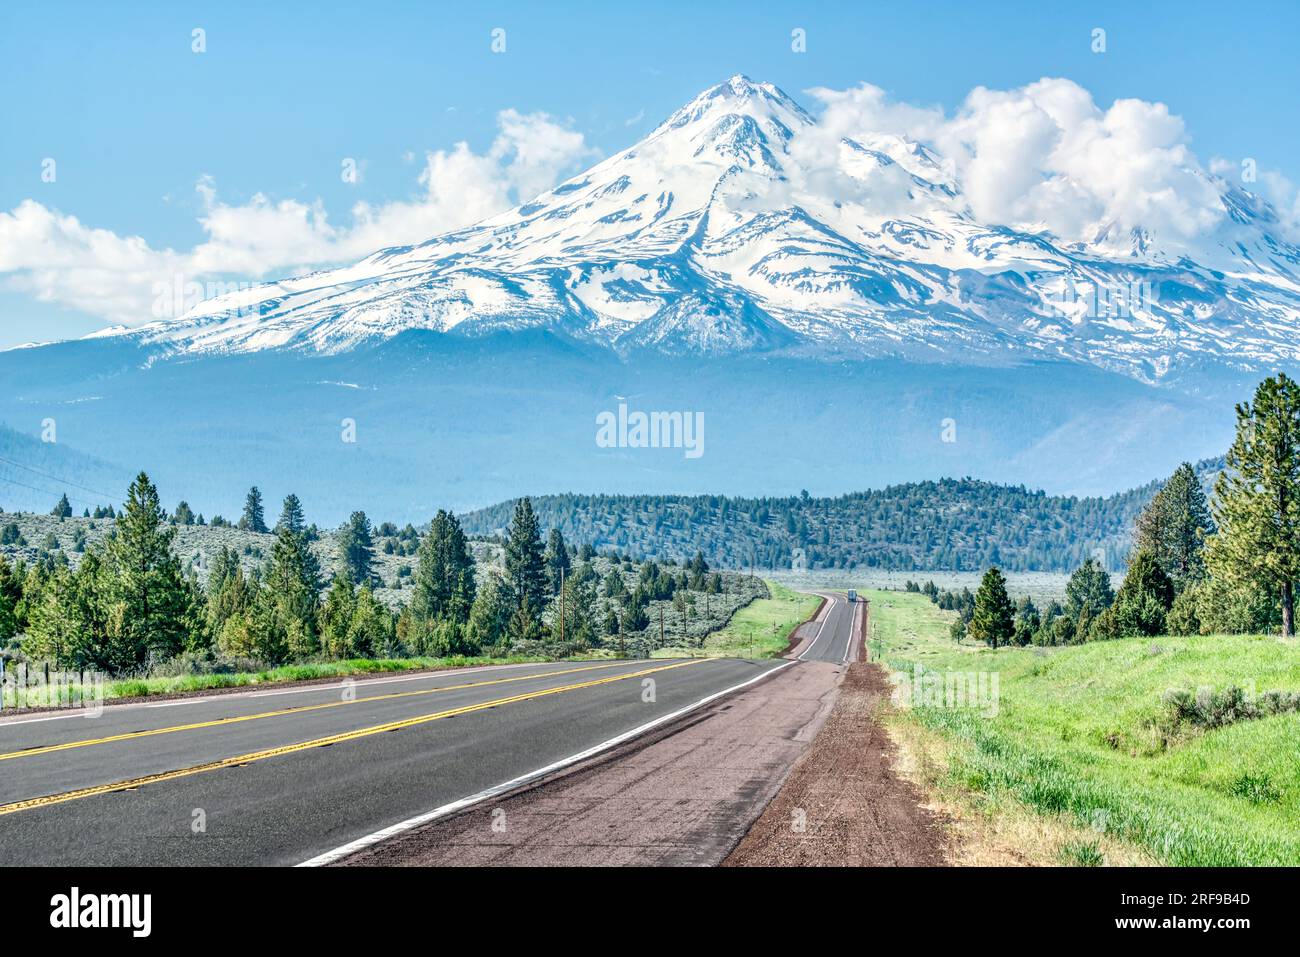 Long road leading towards Mt Shasta in the Cascade mountains in the Klamath National Forest of California Stock Photo